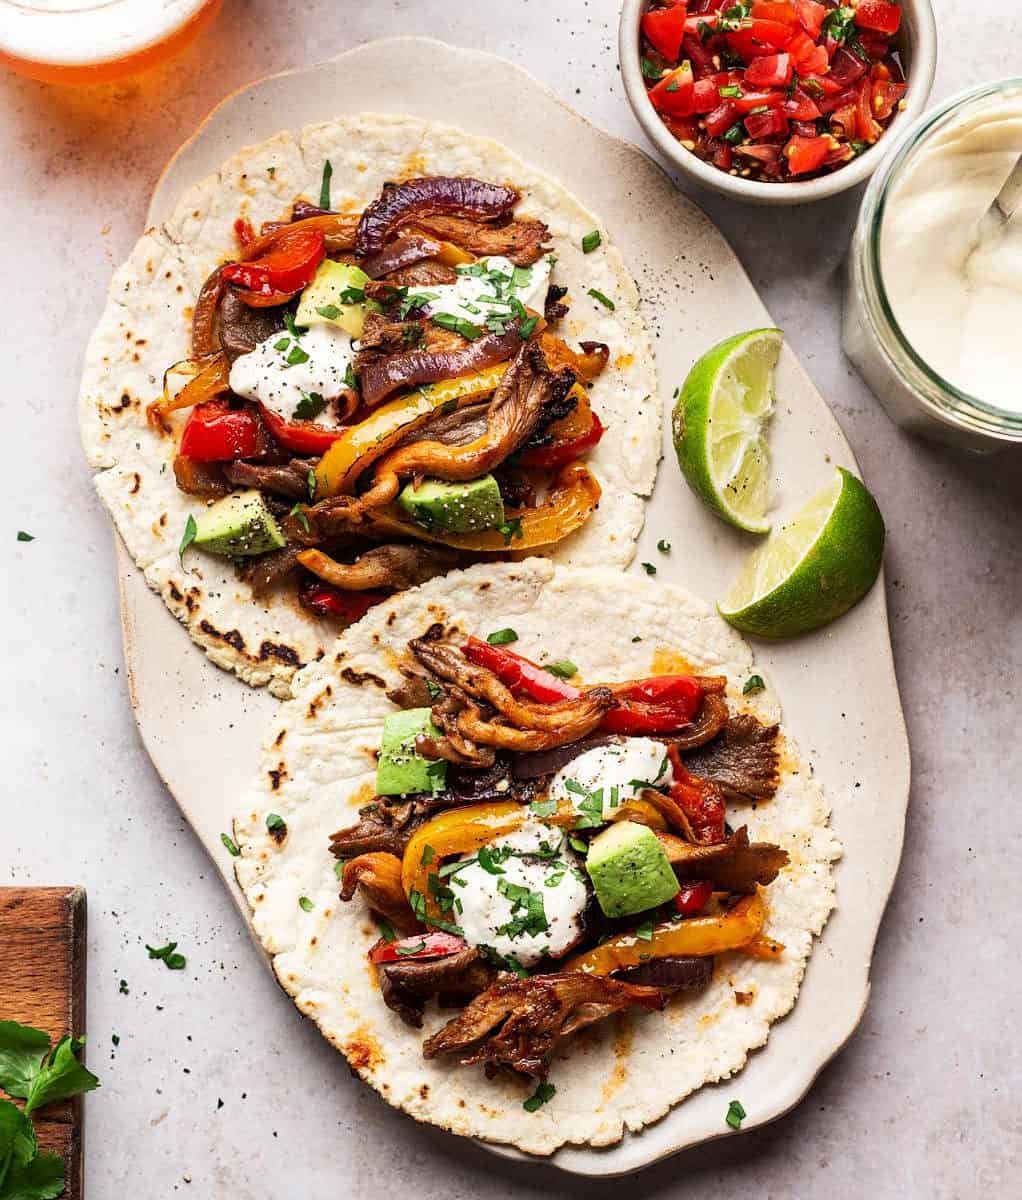  sizzling, colorful, and flavorful fajitas are ready to be served!